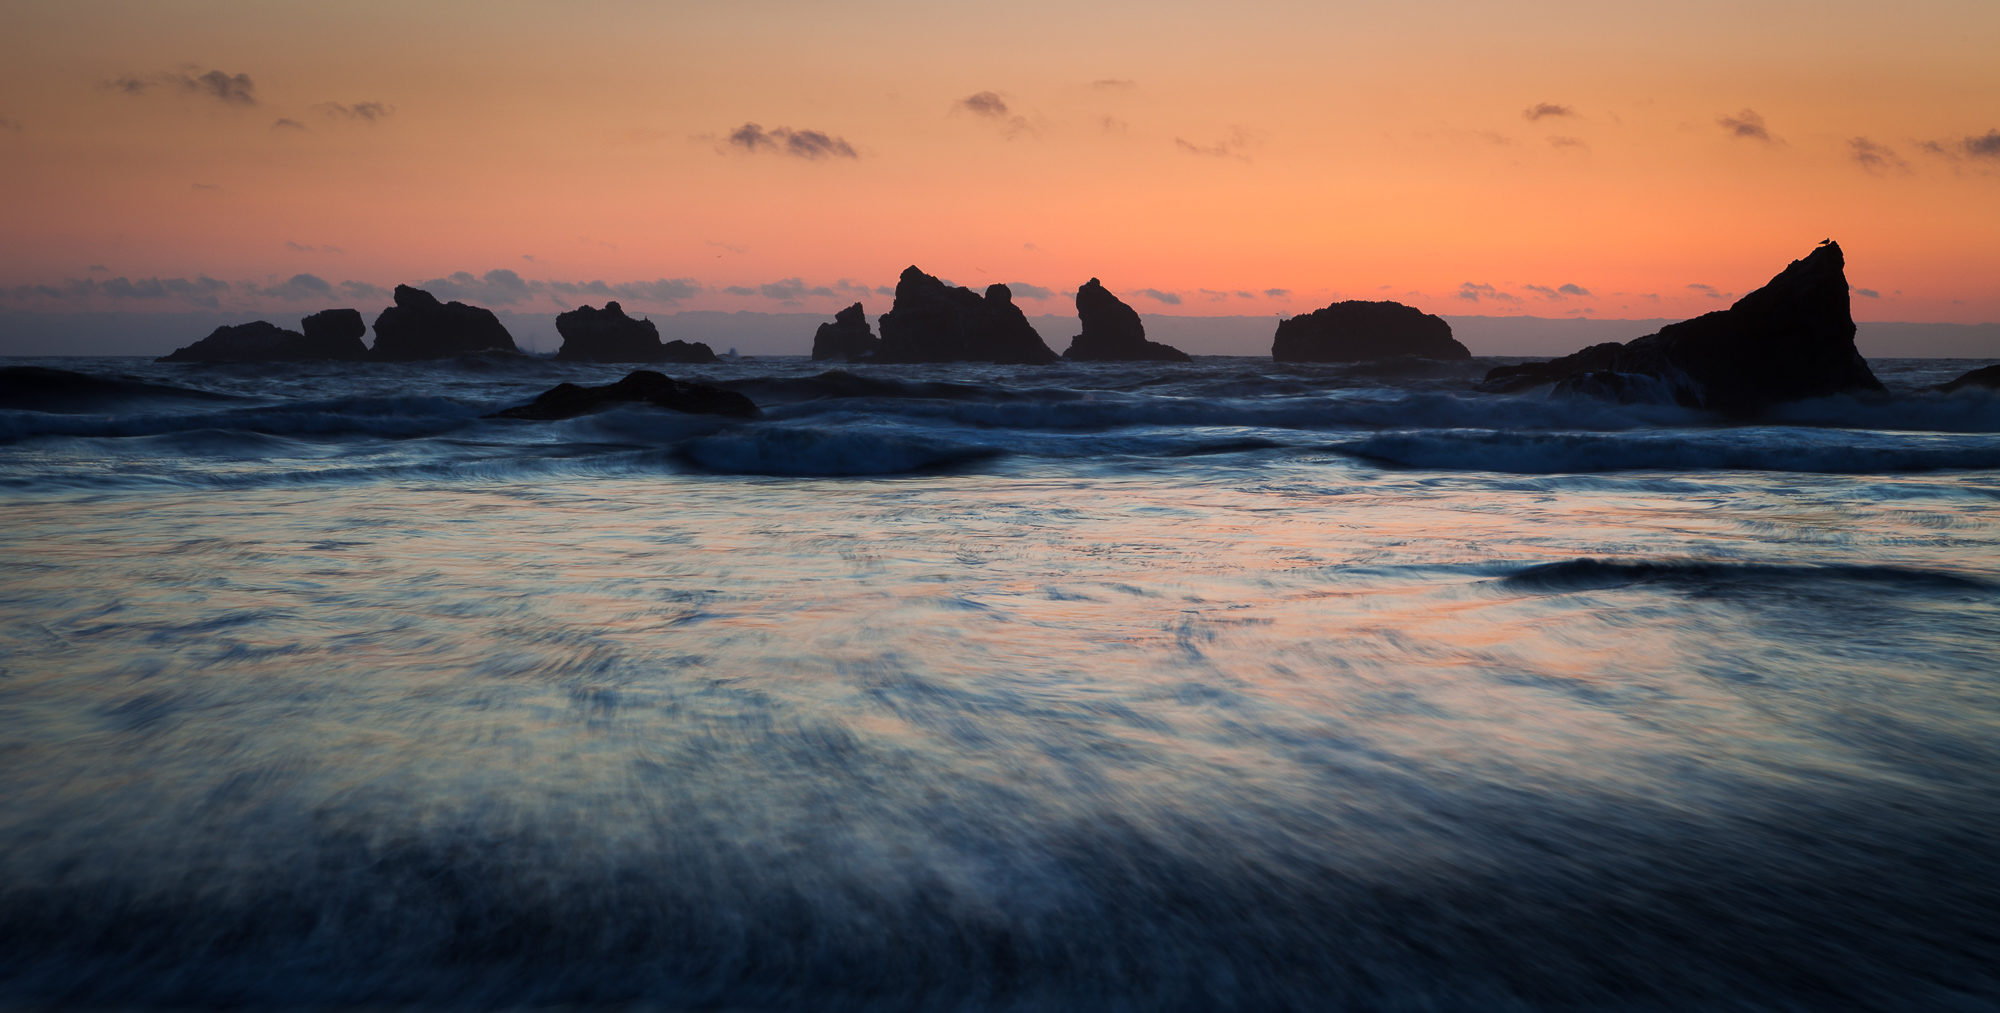 The sun sets behind the western horizon, casting the offshore sea stacks into shadow, Bandon, Oregon